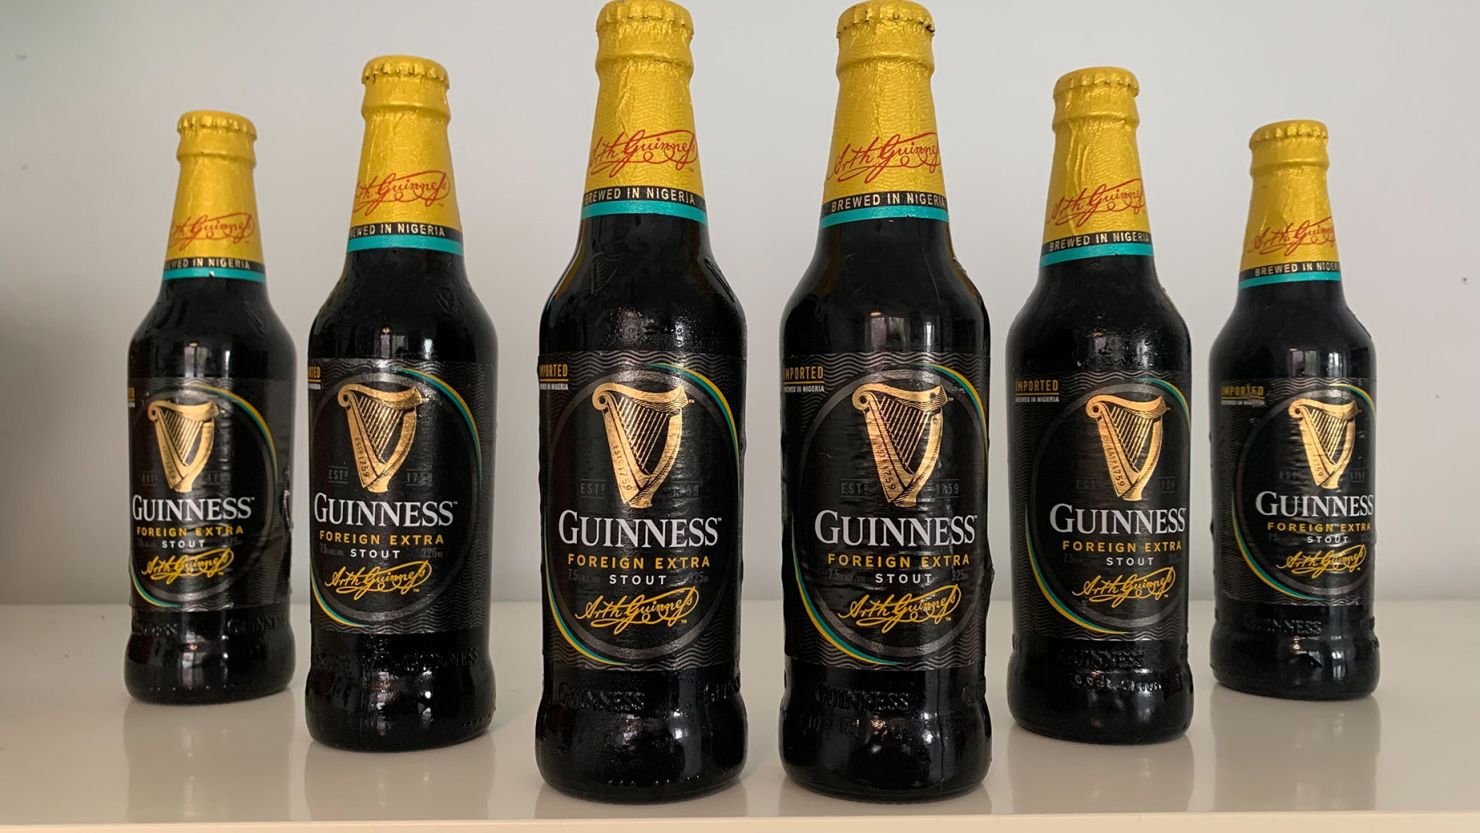 Nigeria has been brewing its own Guinness since November 1963.